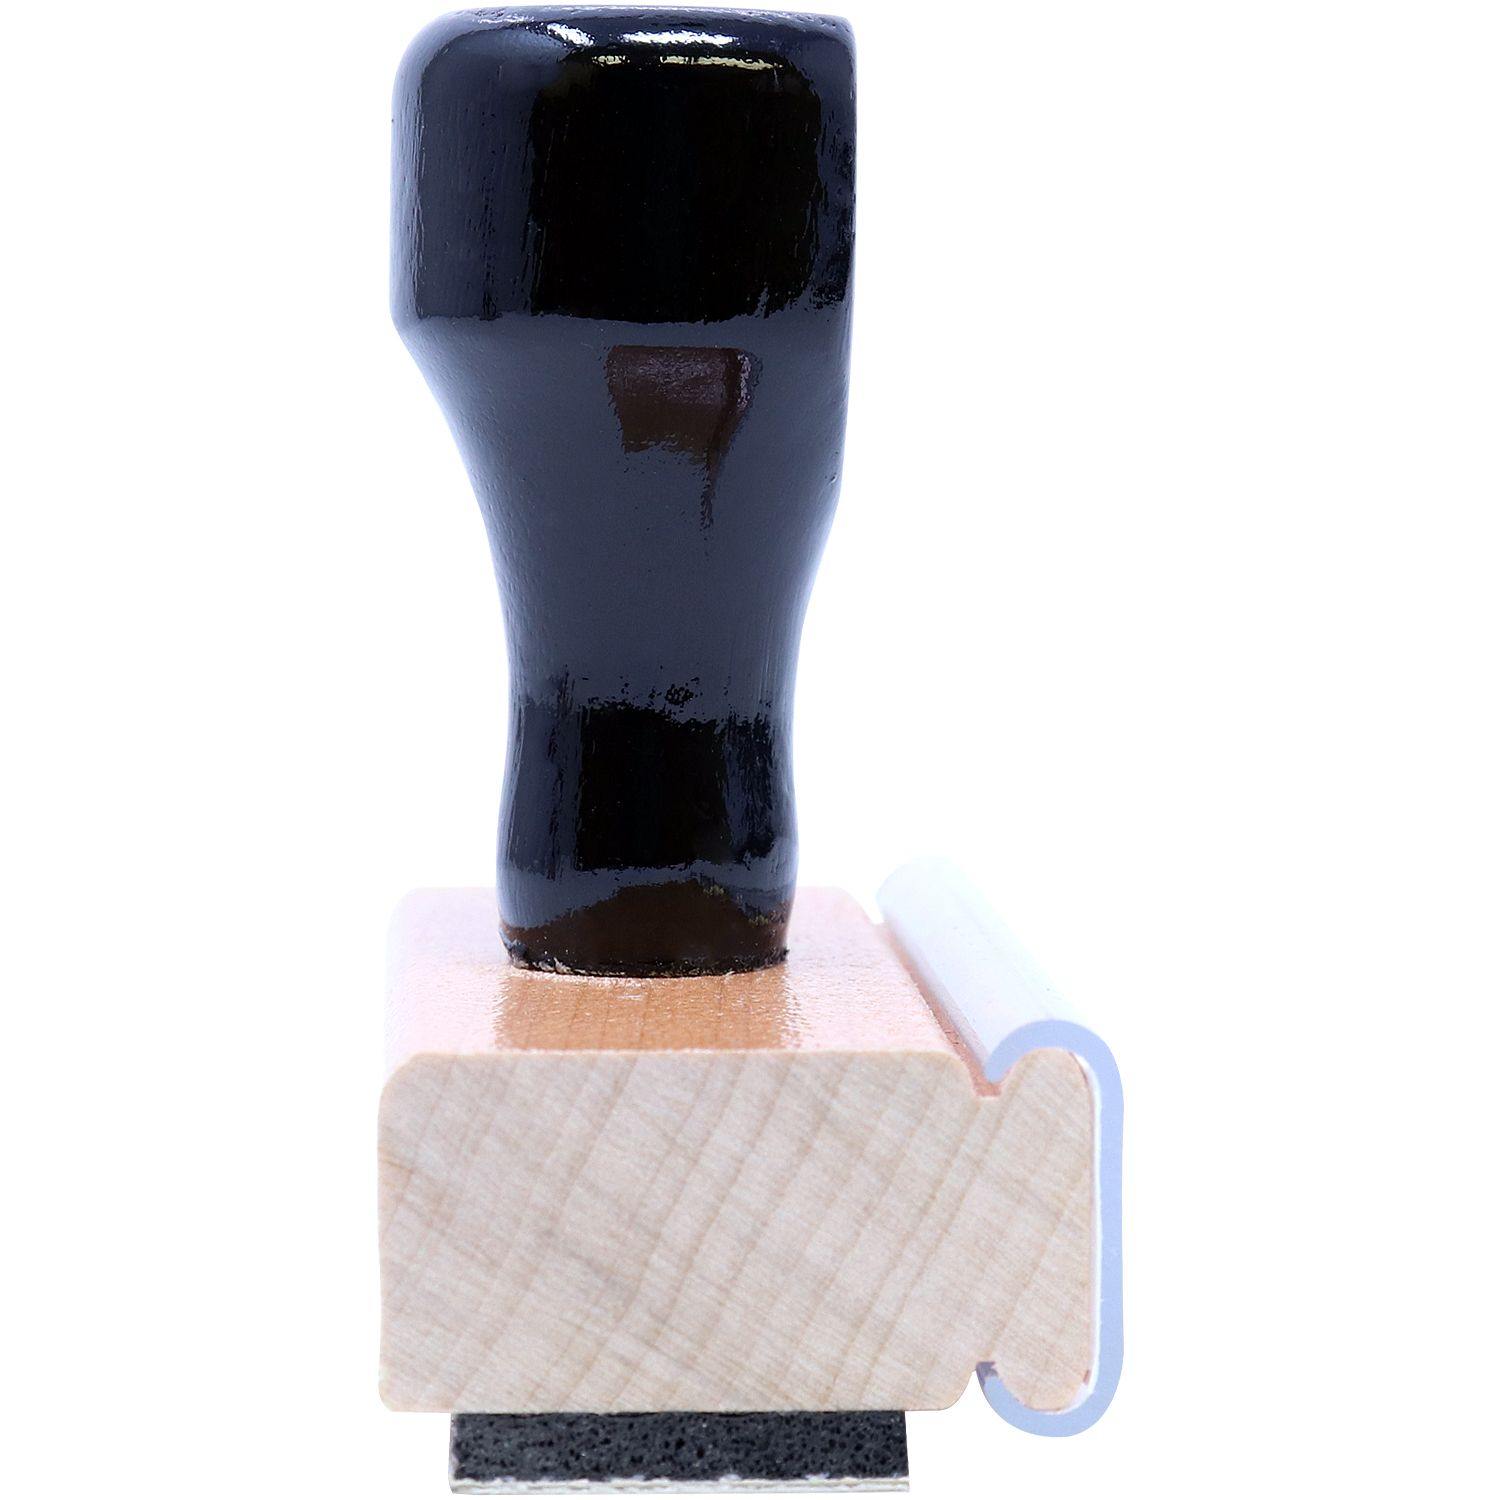 Narrow First Class Mail Rubber Stamp - Engineer Seal Stamps - Brand_Acorn, Impression Size_Small, Stamp Type_Regular Stamp, Type of Use_Business, Type of Use_Office, Type of Use_Postal & Mailing, Type of Use_Professional